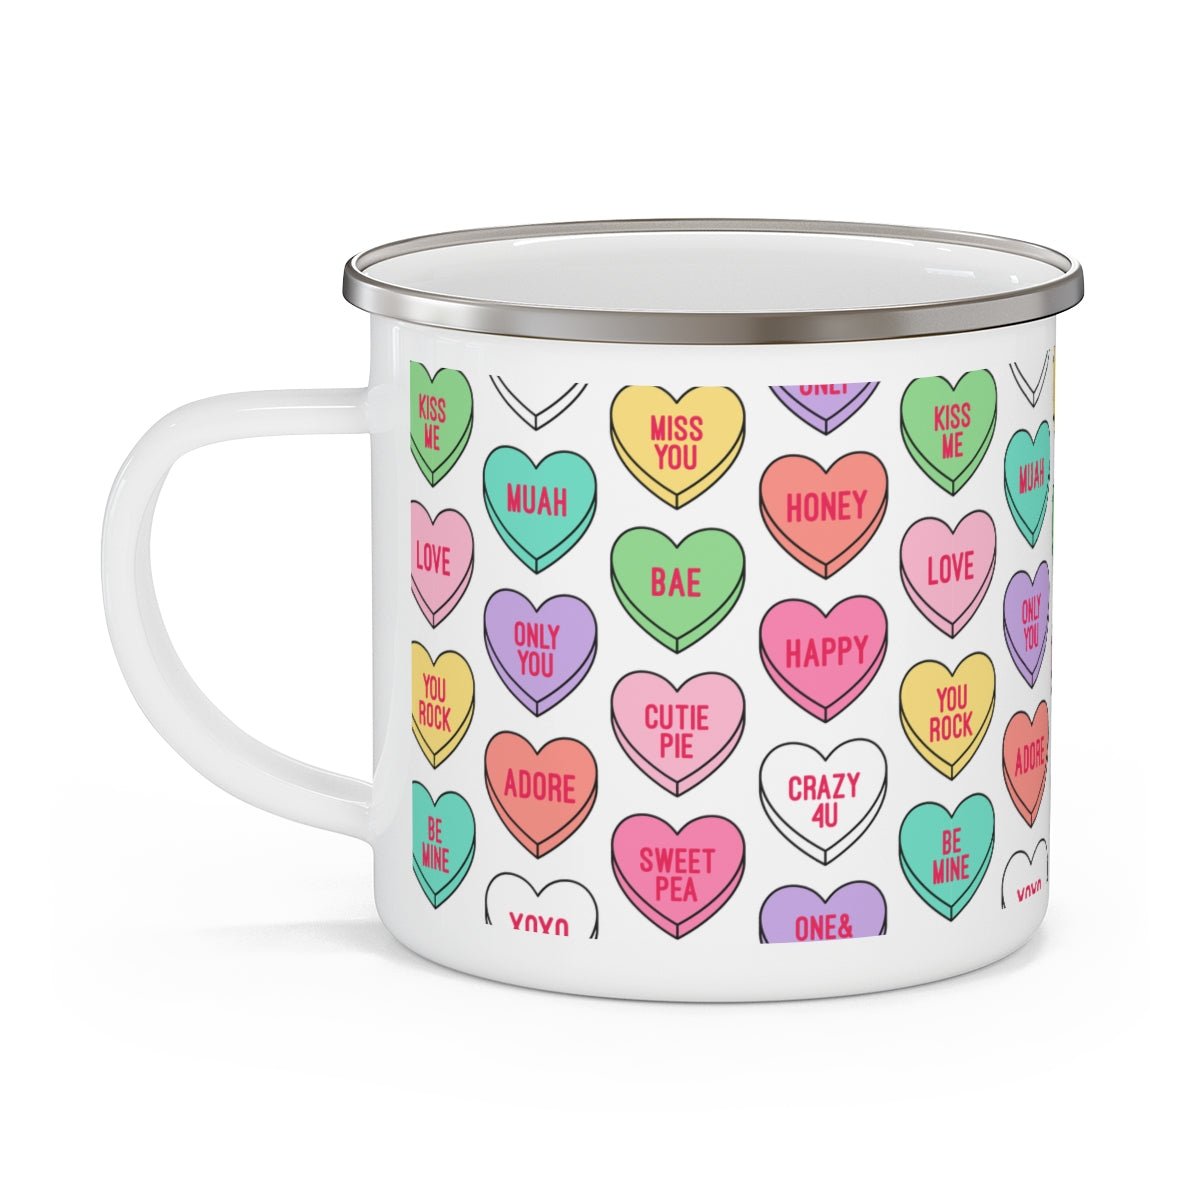 Candy Conversation Hearts Stainless Steel Camping Mug - Puffin Lime